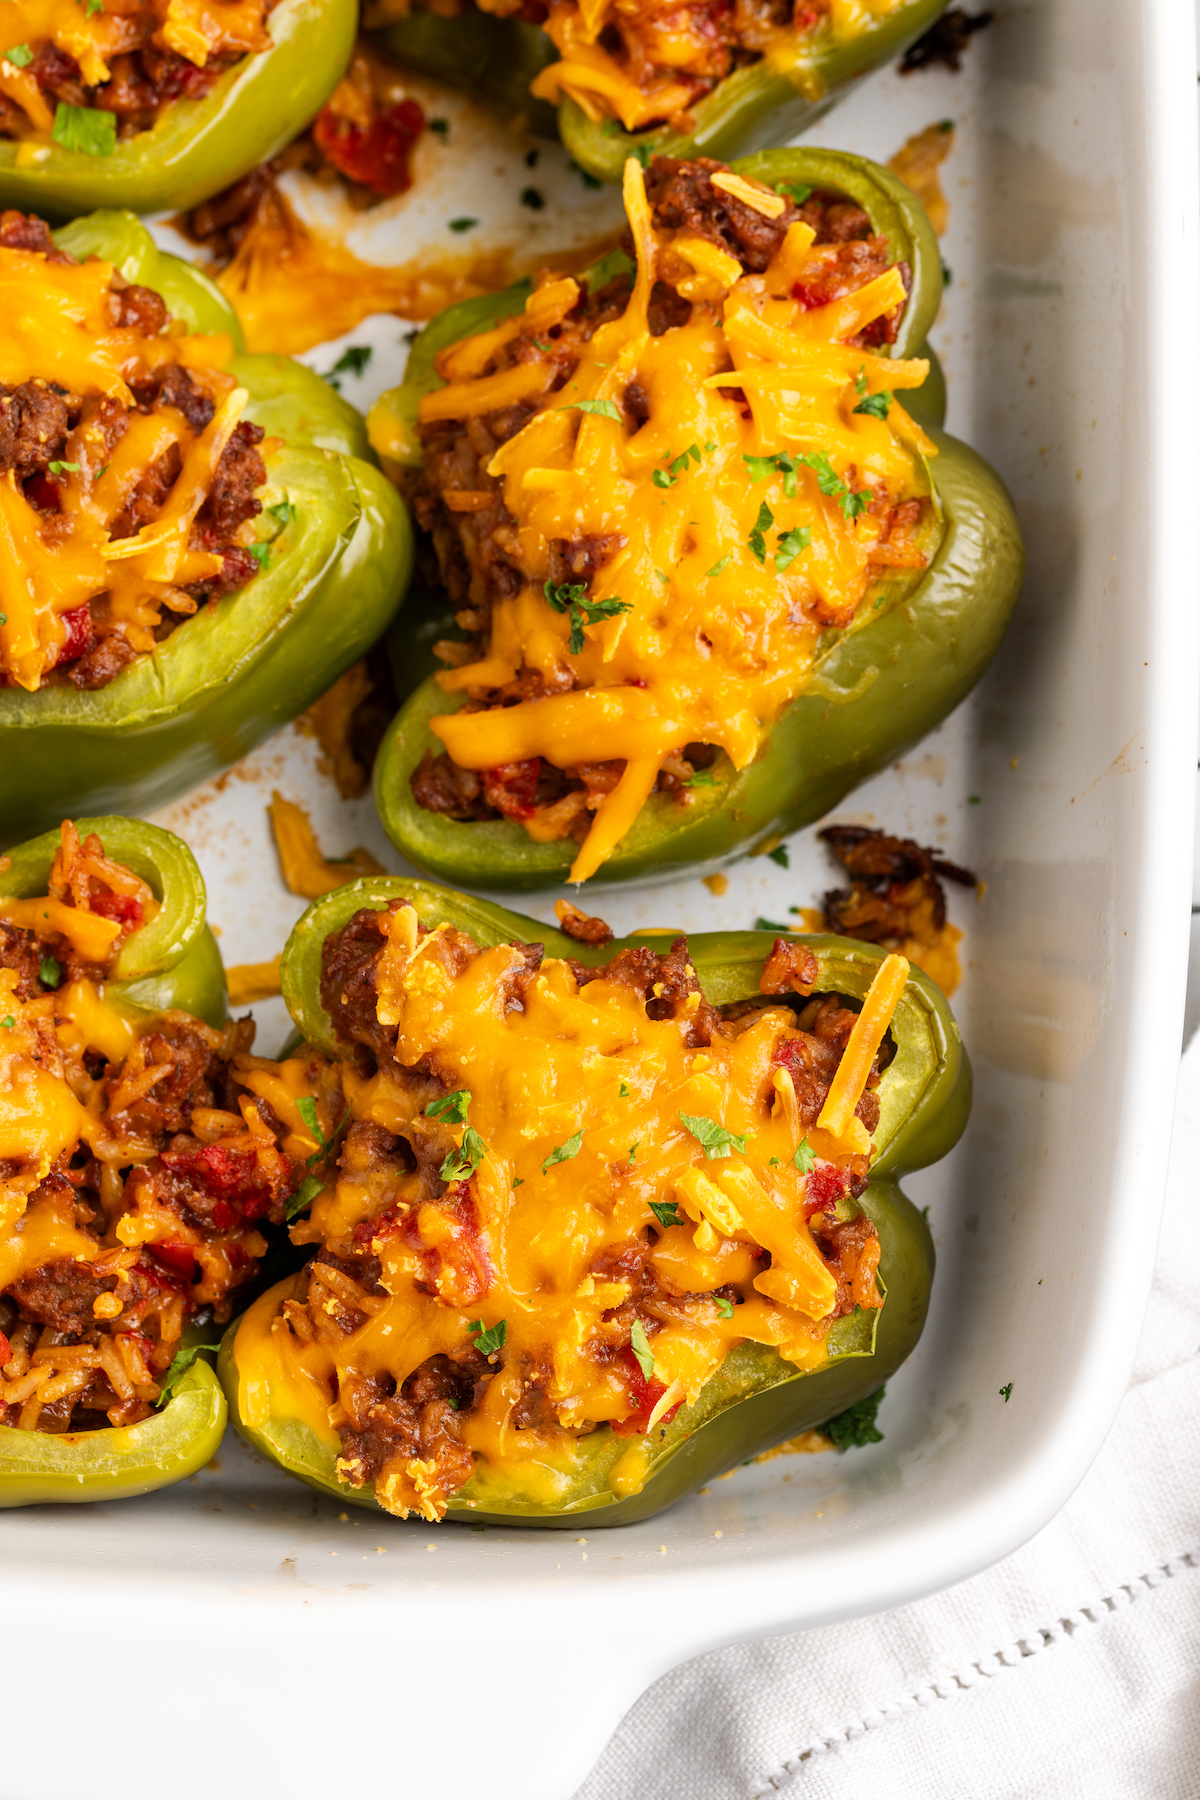 Overhead view of stuffed green peppers in baking dish